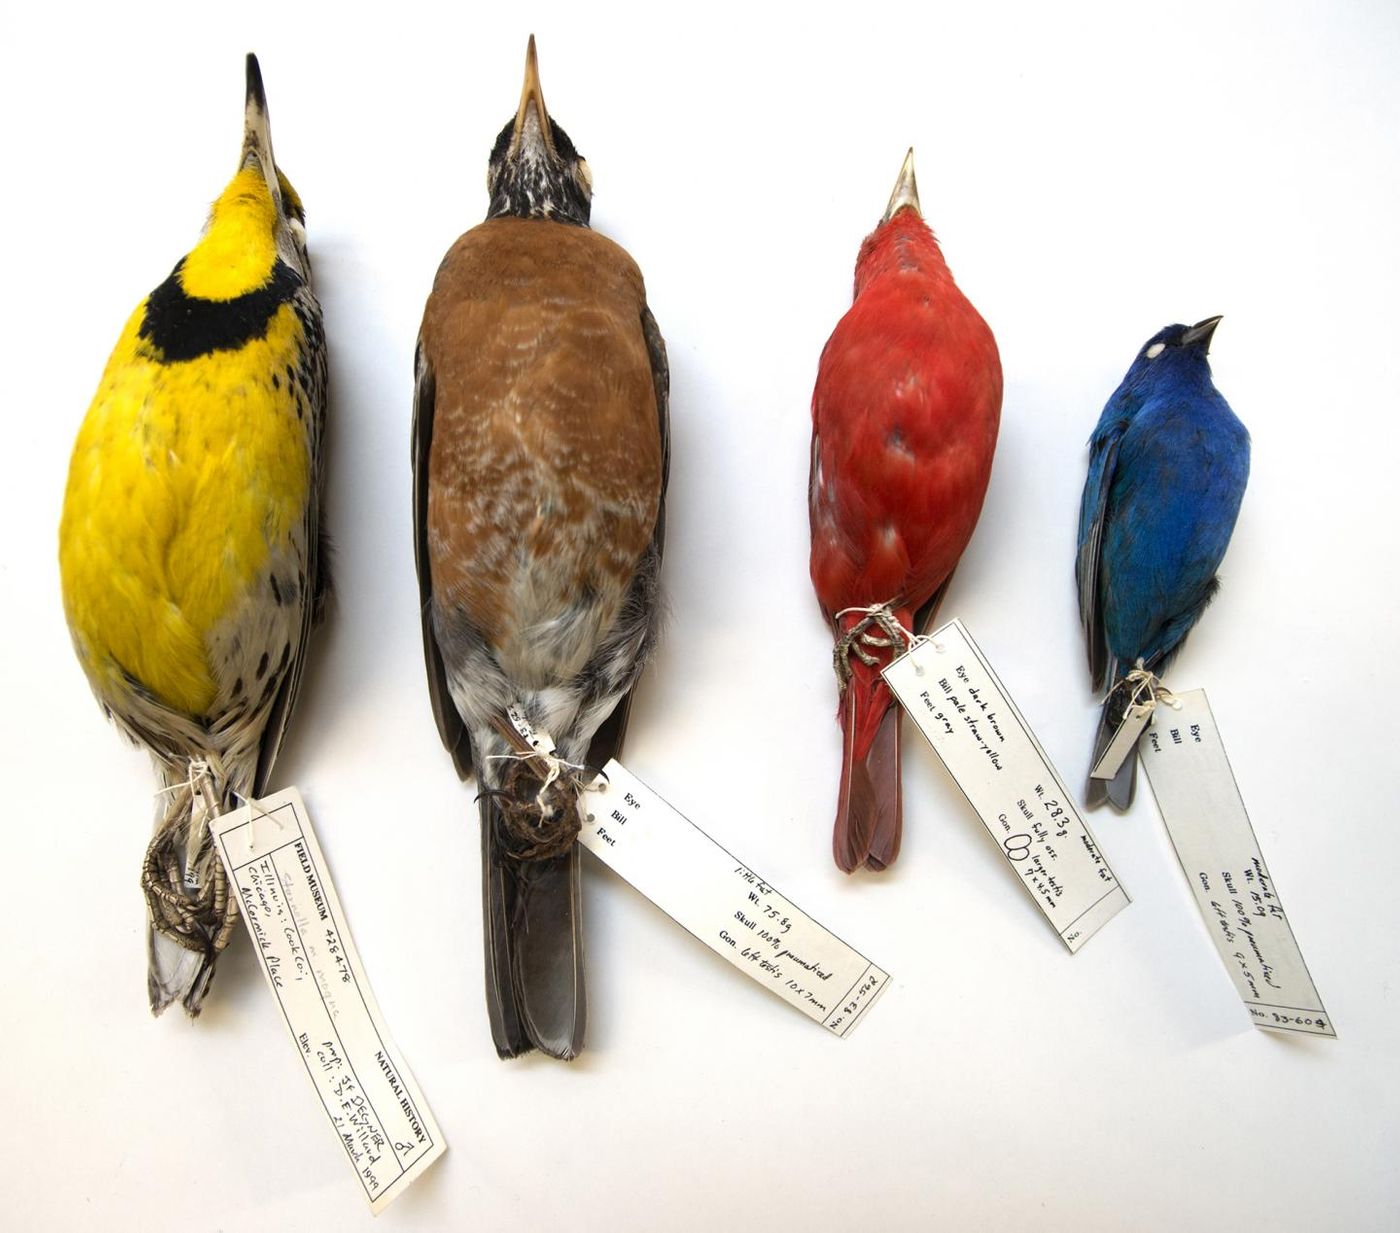 This image by Karen Bean of the Field Museum shows 4 birds that died crashing into McCormick Place windows; they're now in the Museum's collections.